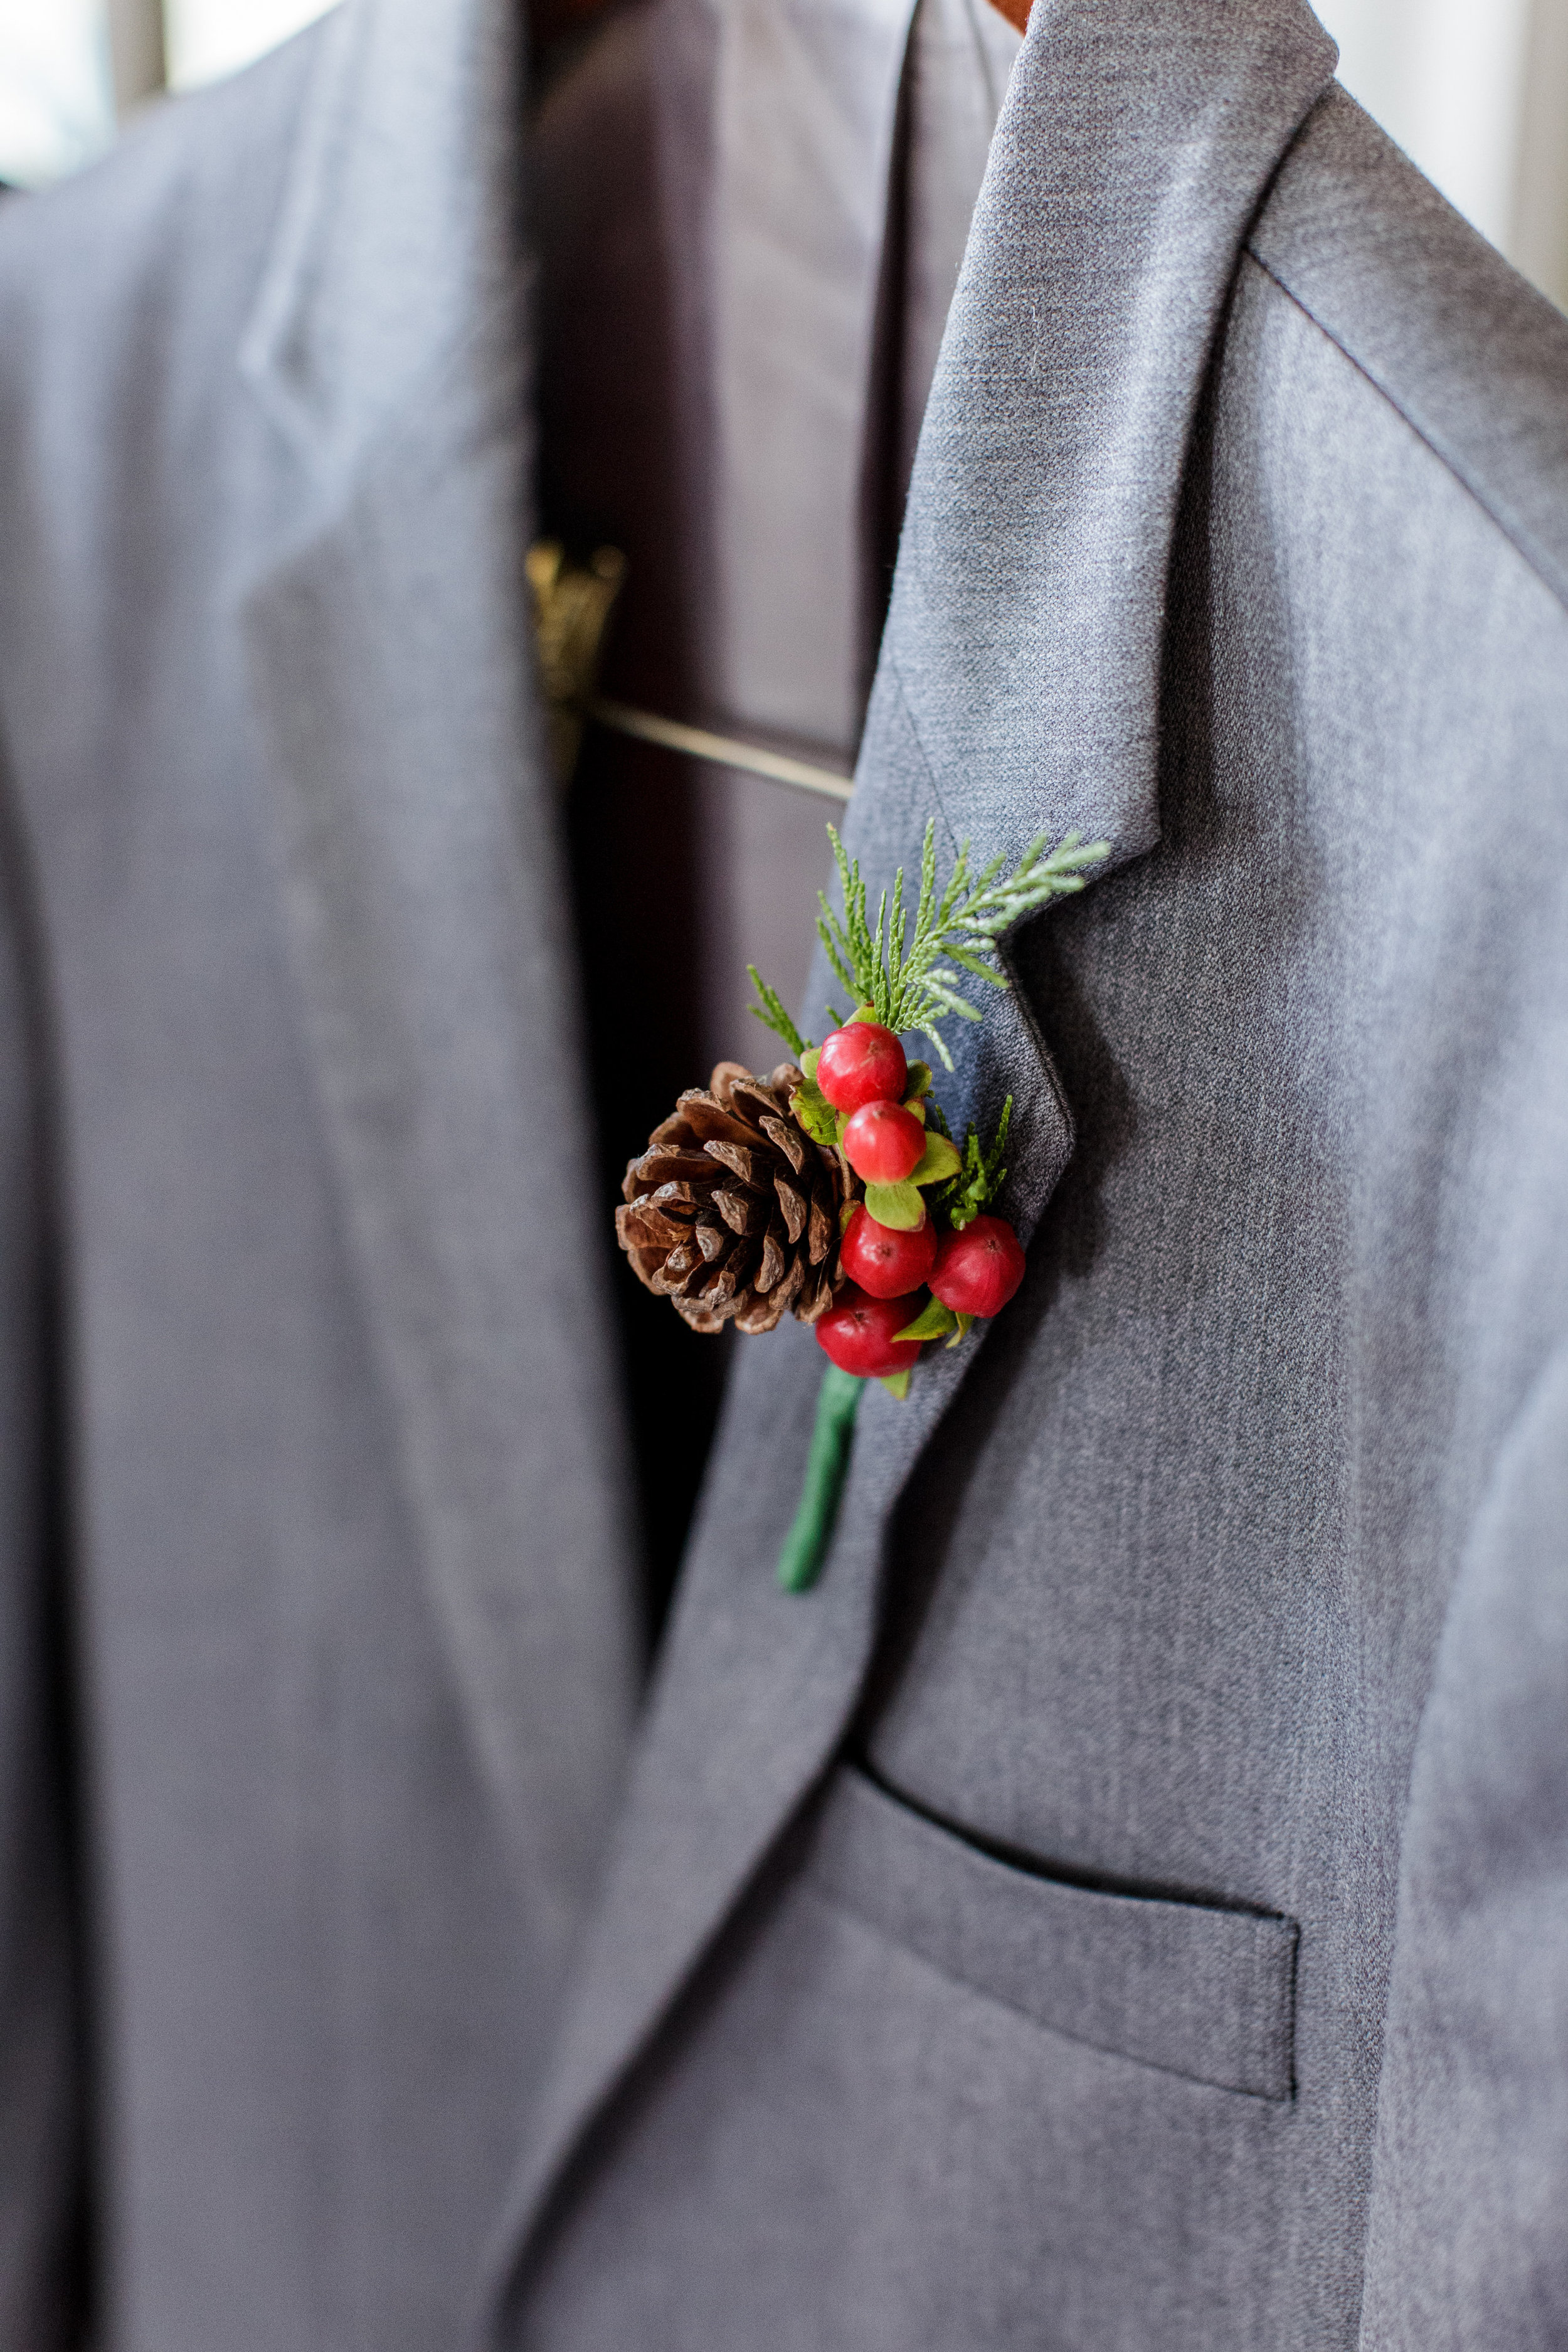 Bluegrass Chic - Bumby Photography - Pinecone boutonniere